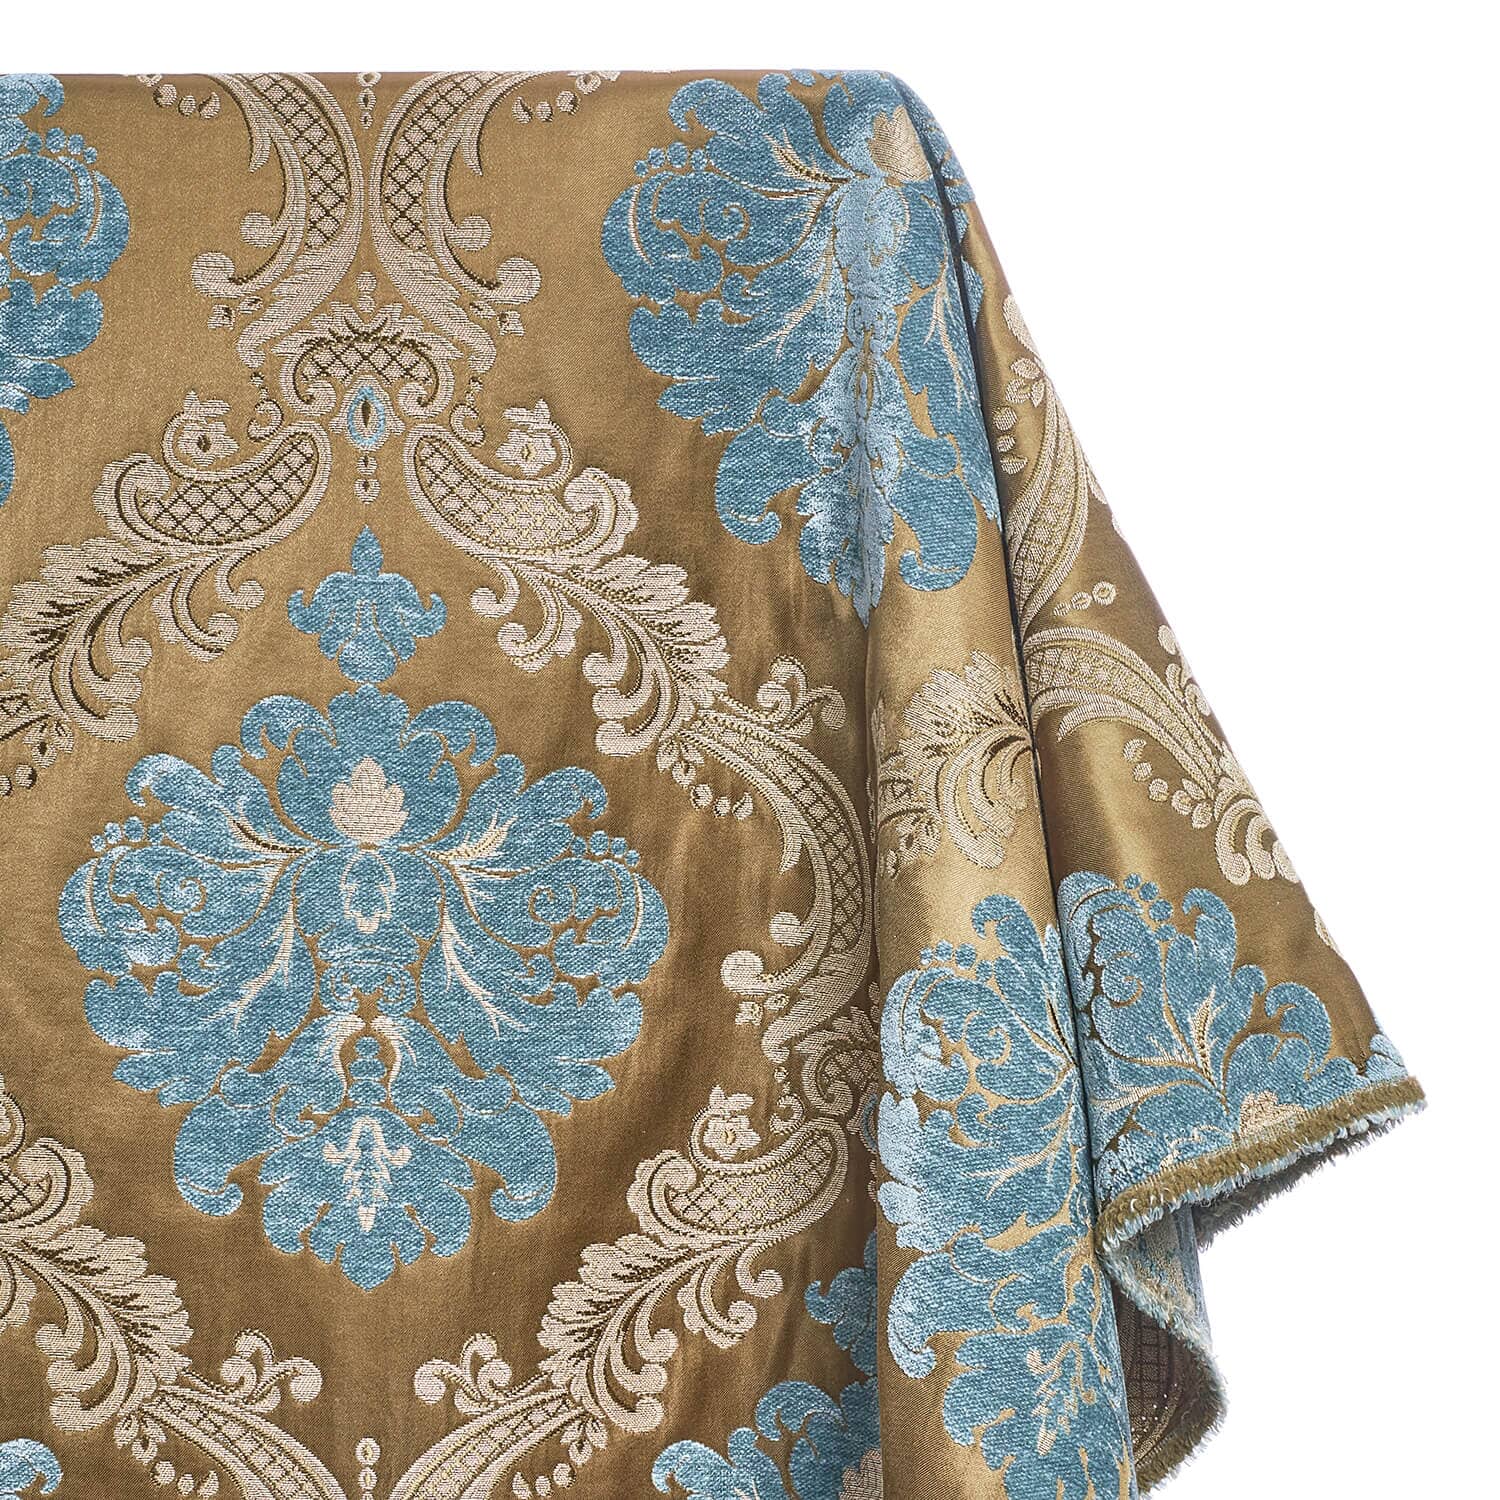 3 COLORS / Versailles Damask Brocade Chenille Woven Jacquard Fabric